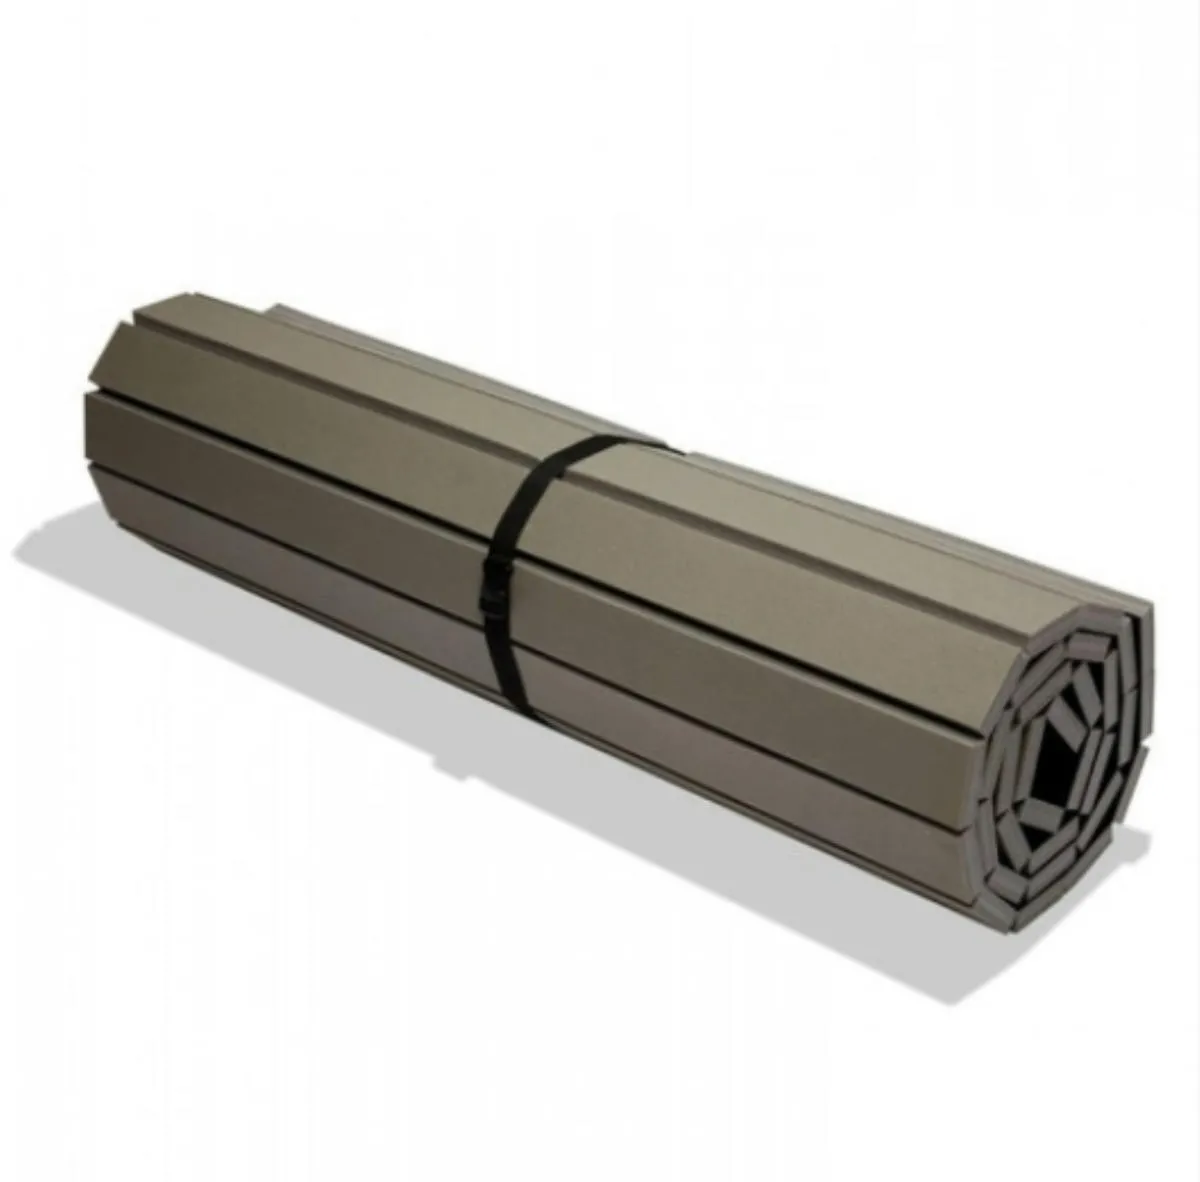 Alfombra enrollable Zebra Home Roll out gris